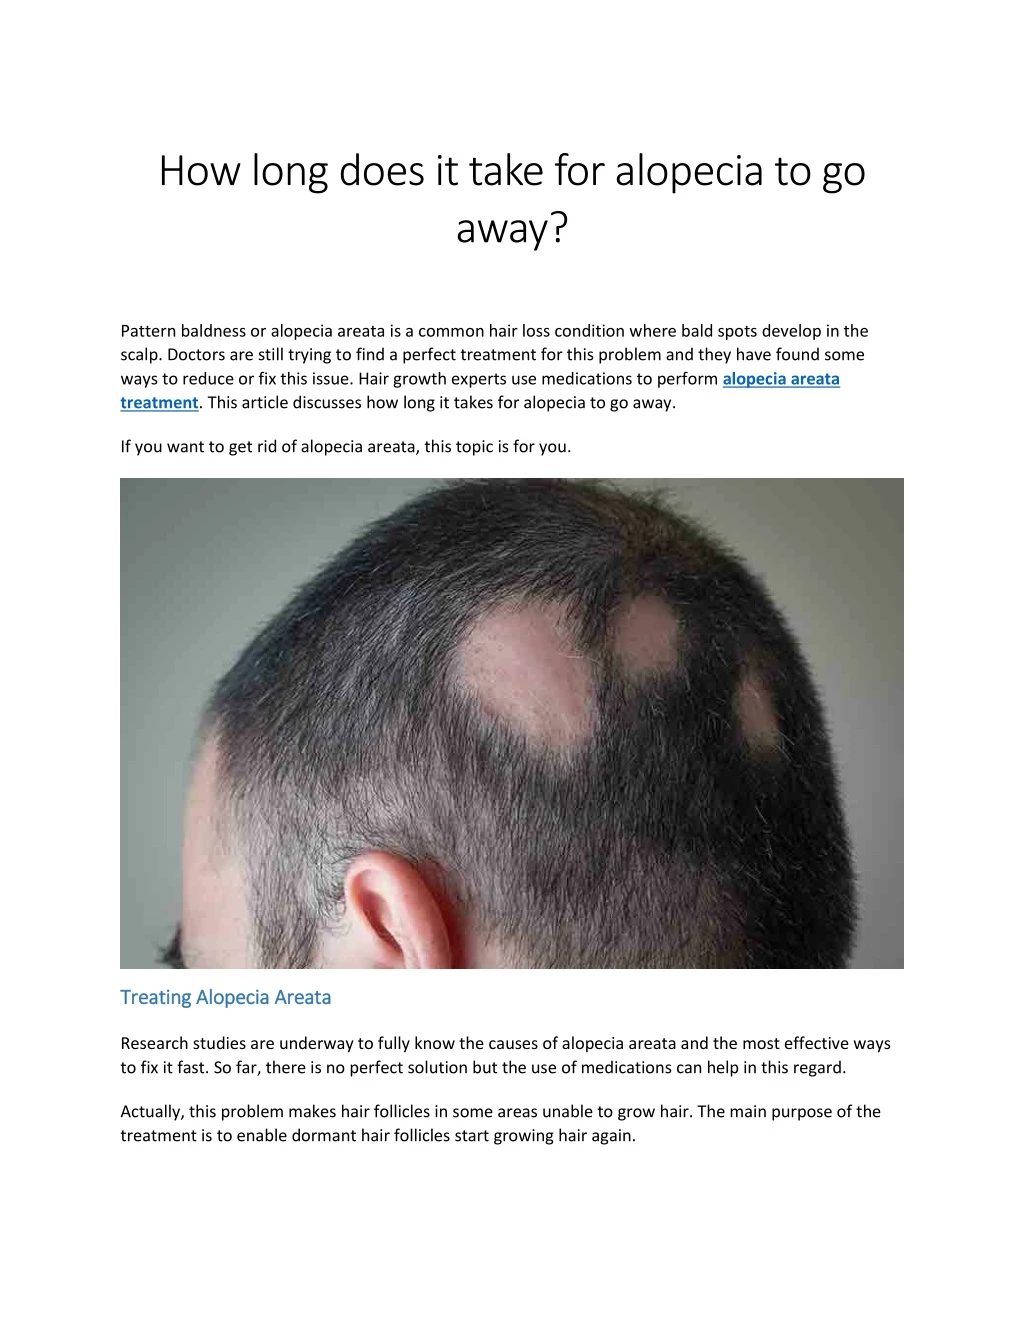 how long does it take for alopecia to go away